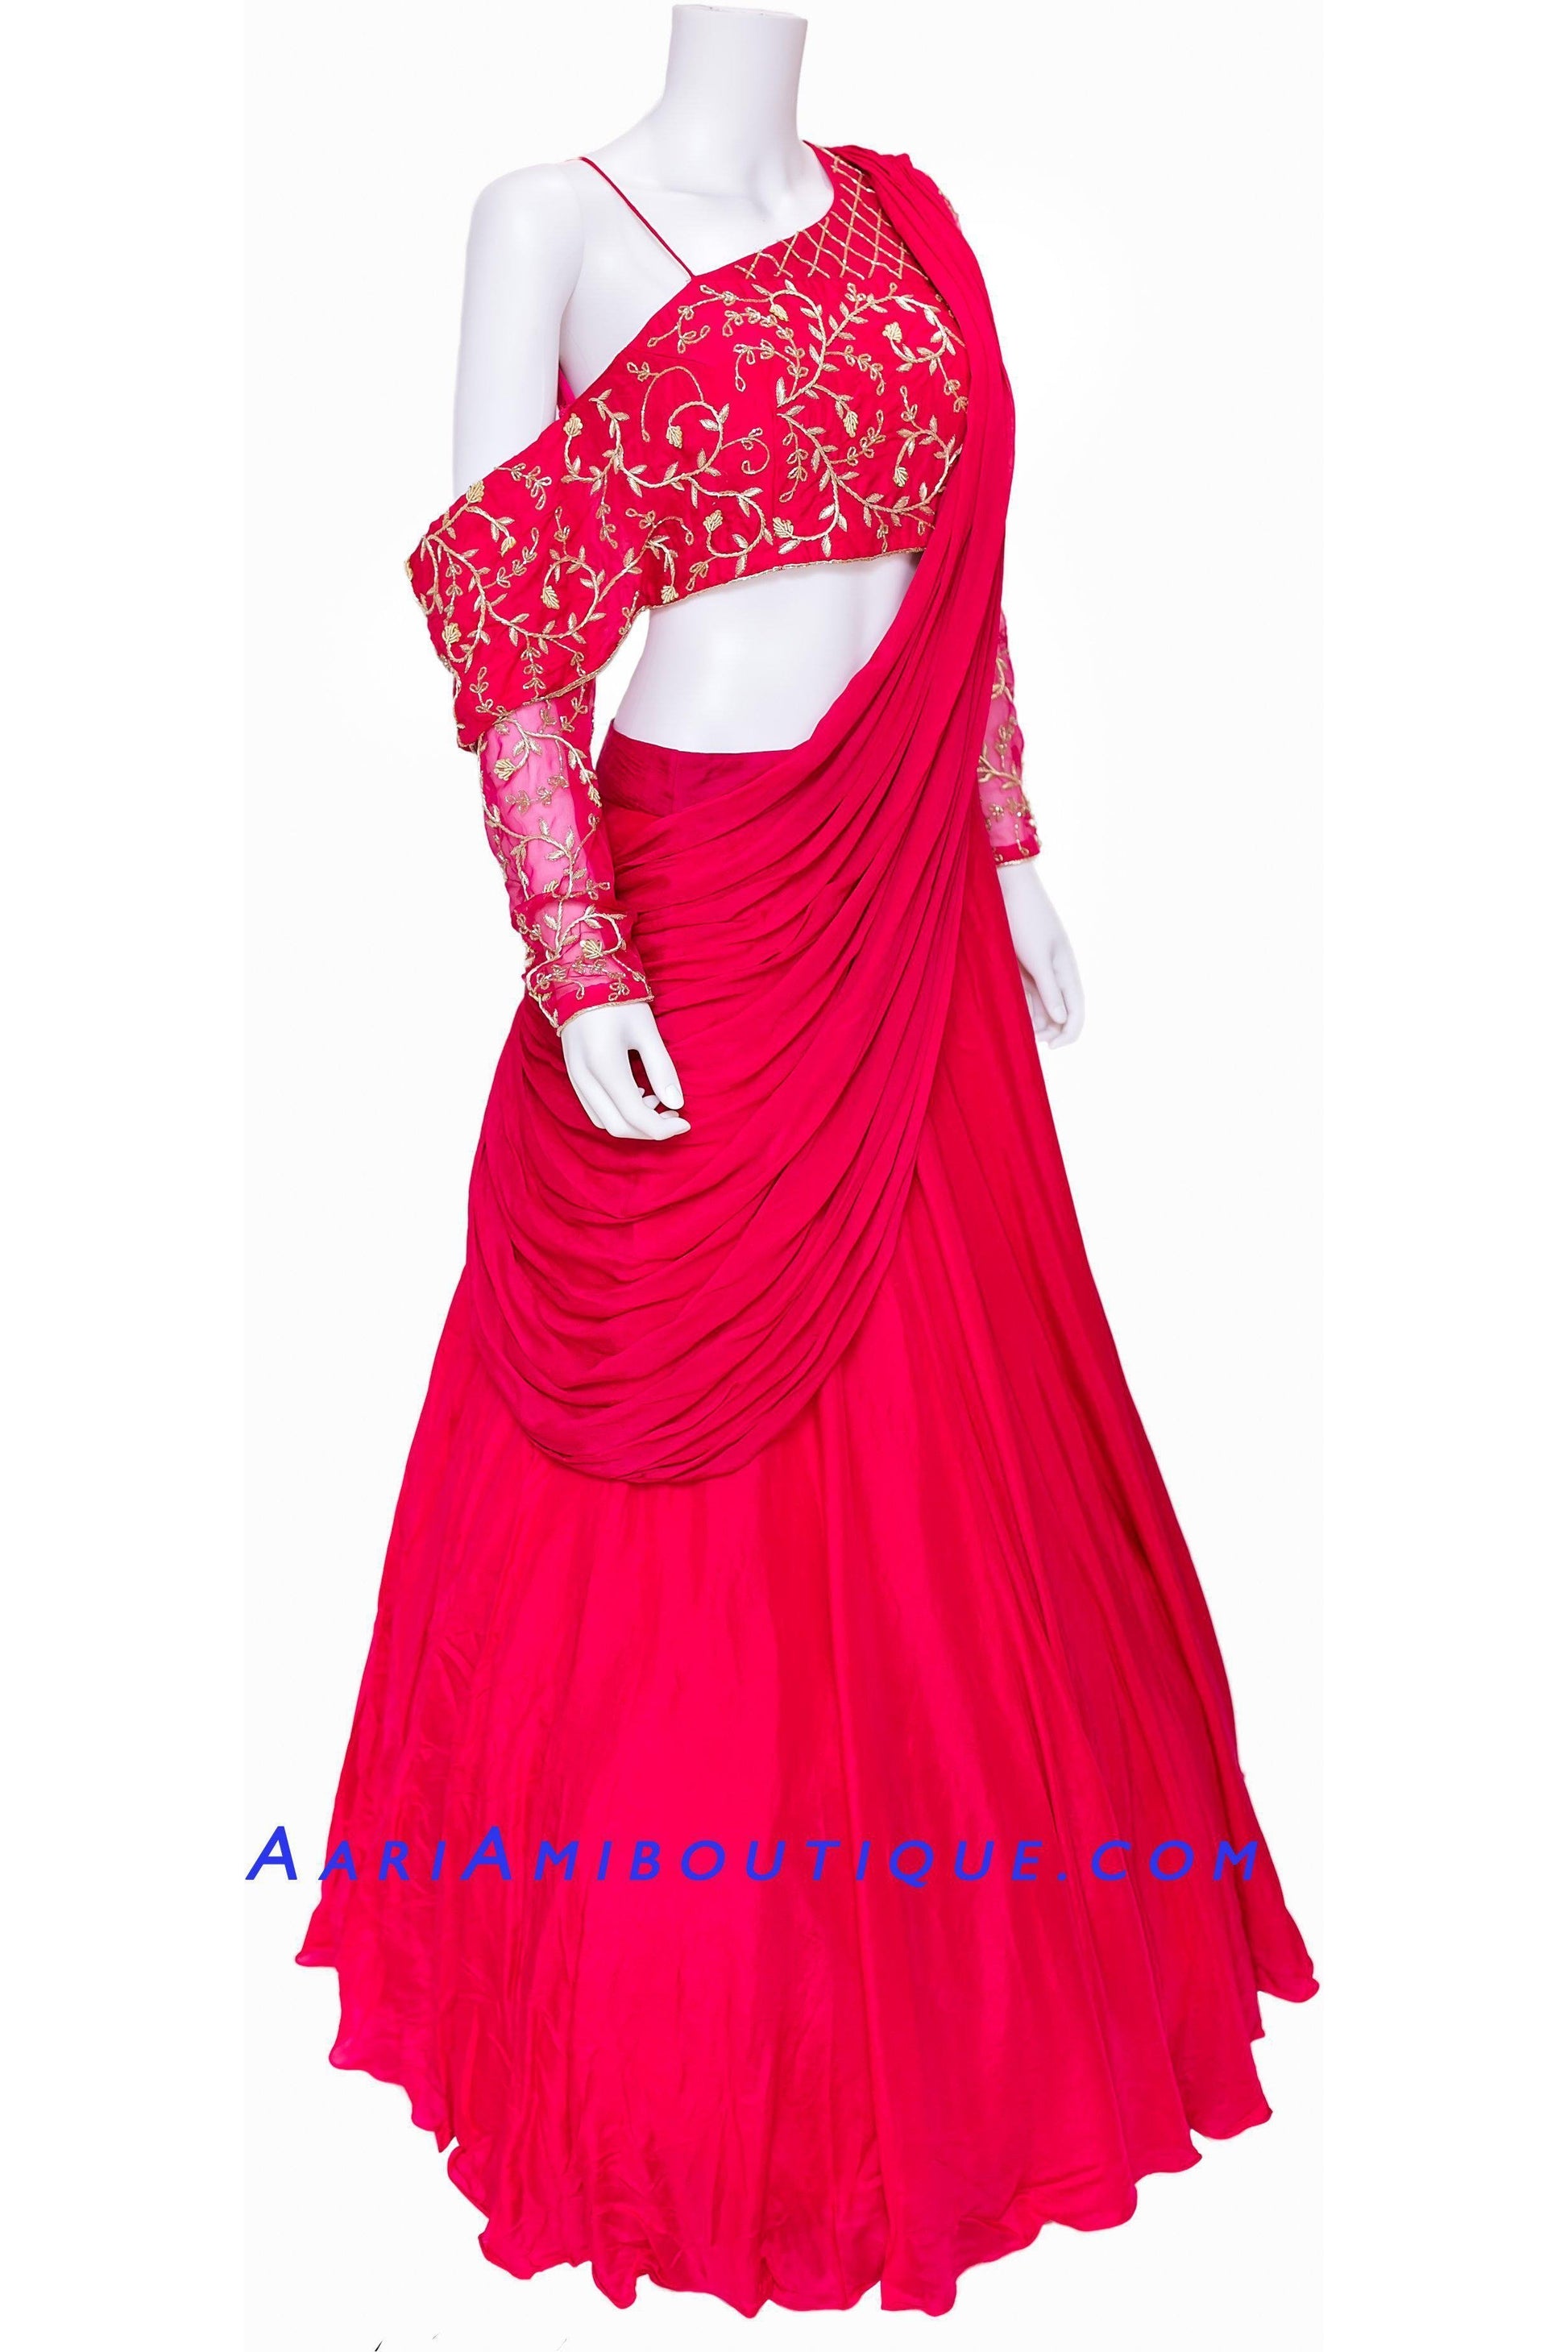 Hot Pink Lehenga with One Shoulder Blouse and attached Drape Dupatta-AariAmi Boutique